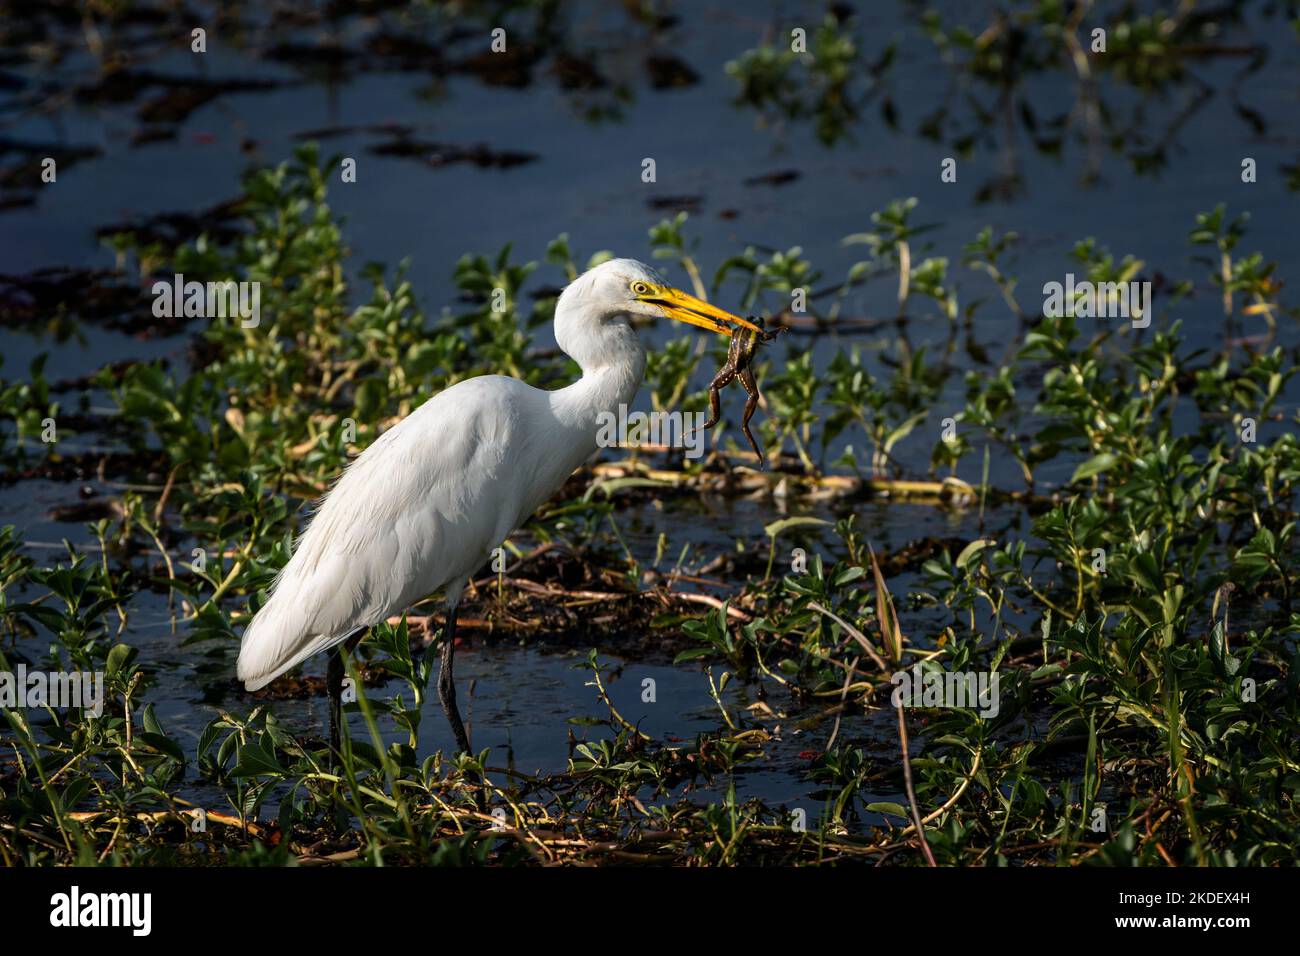 Eastern Great Egret with a frog in its bill. Stock Photo